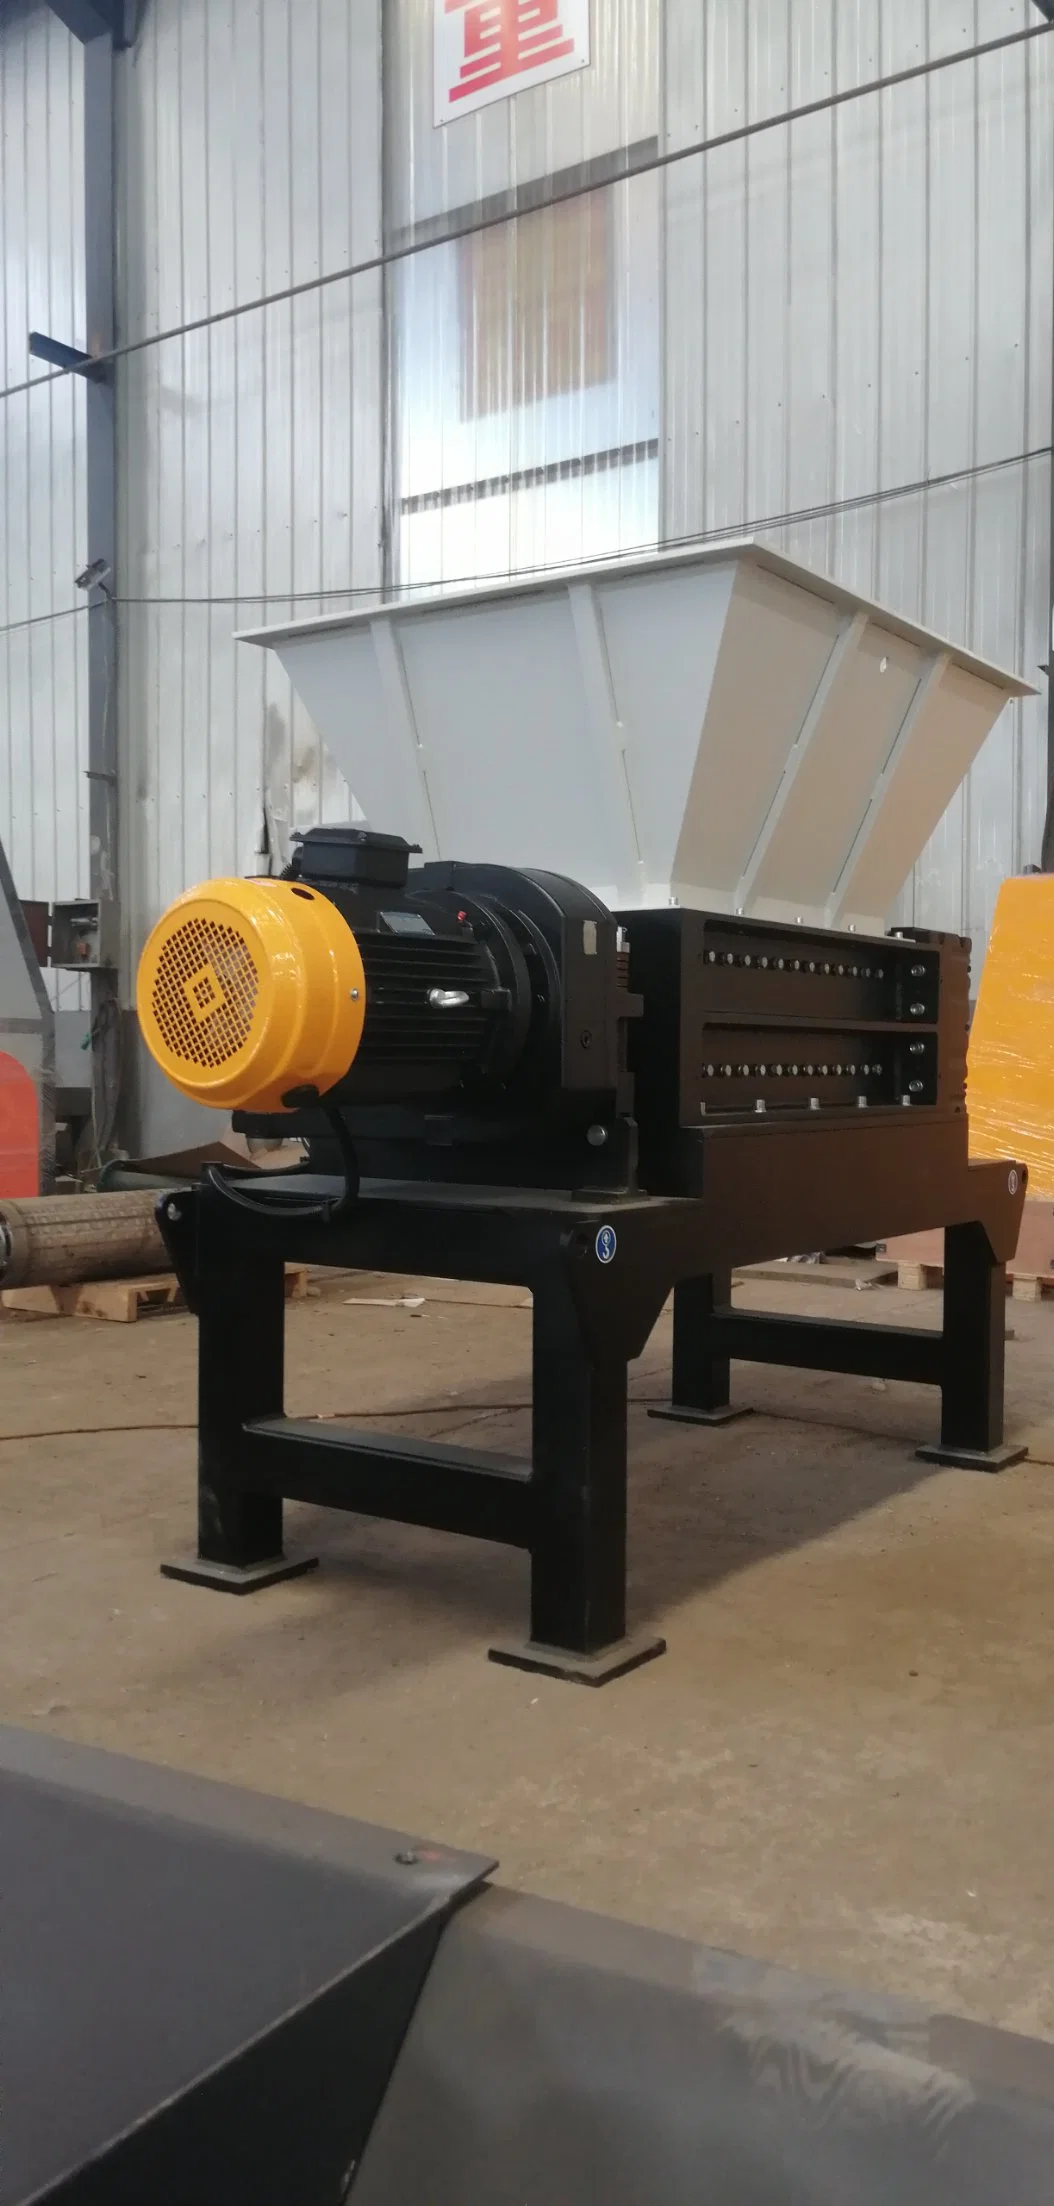 Small Mobile Jaw Crusher Equipment for Sale on Gravel Stone Crushing